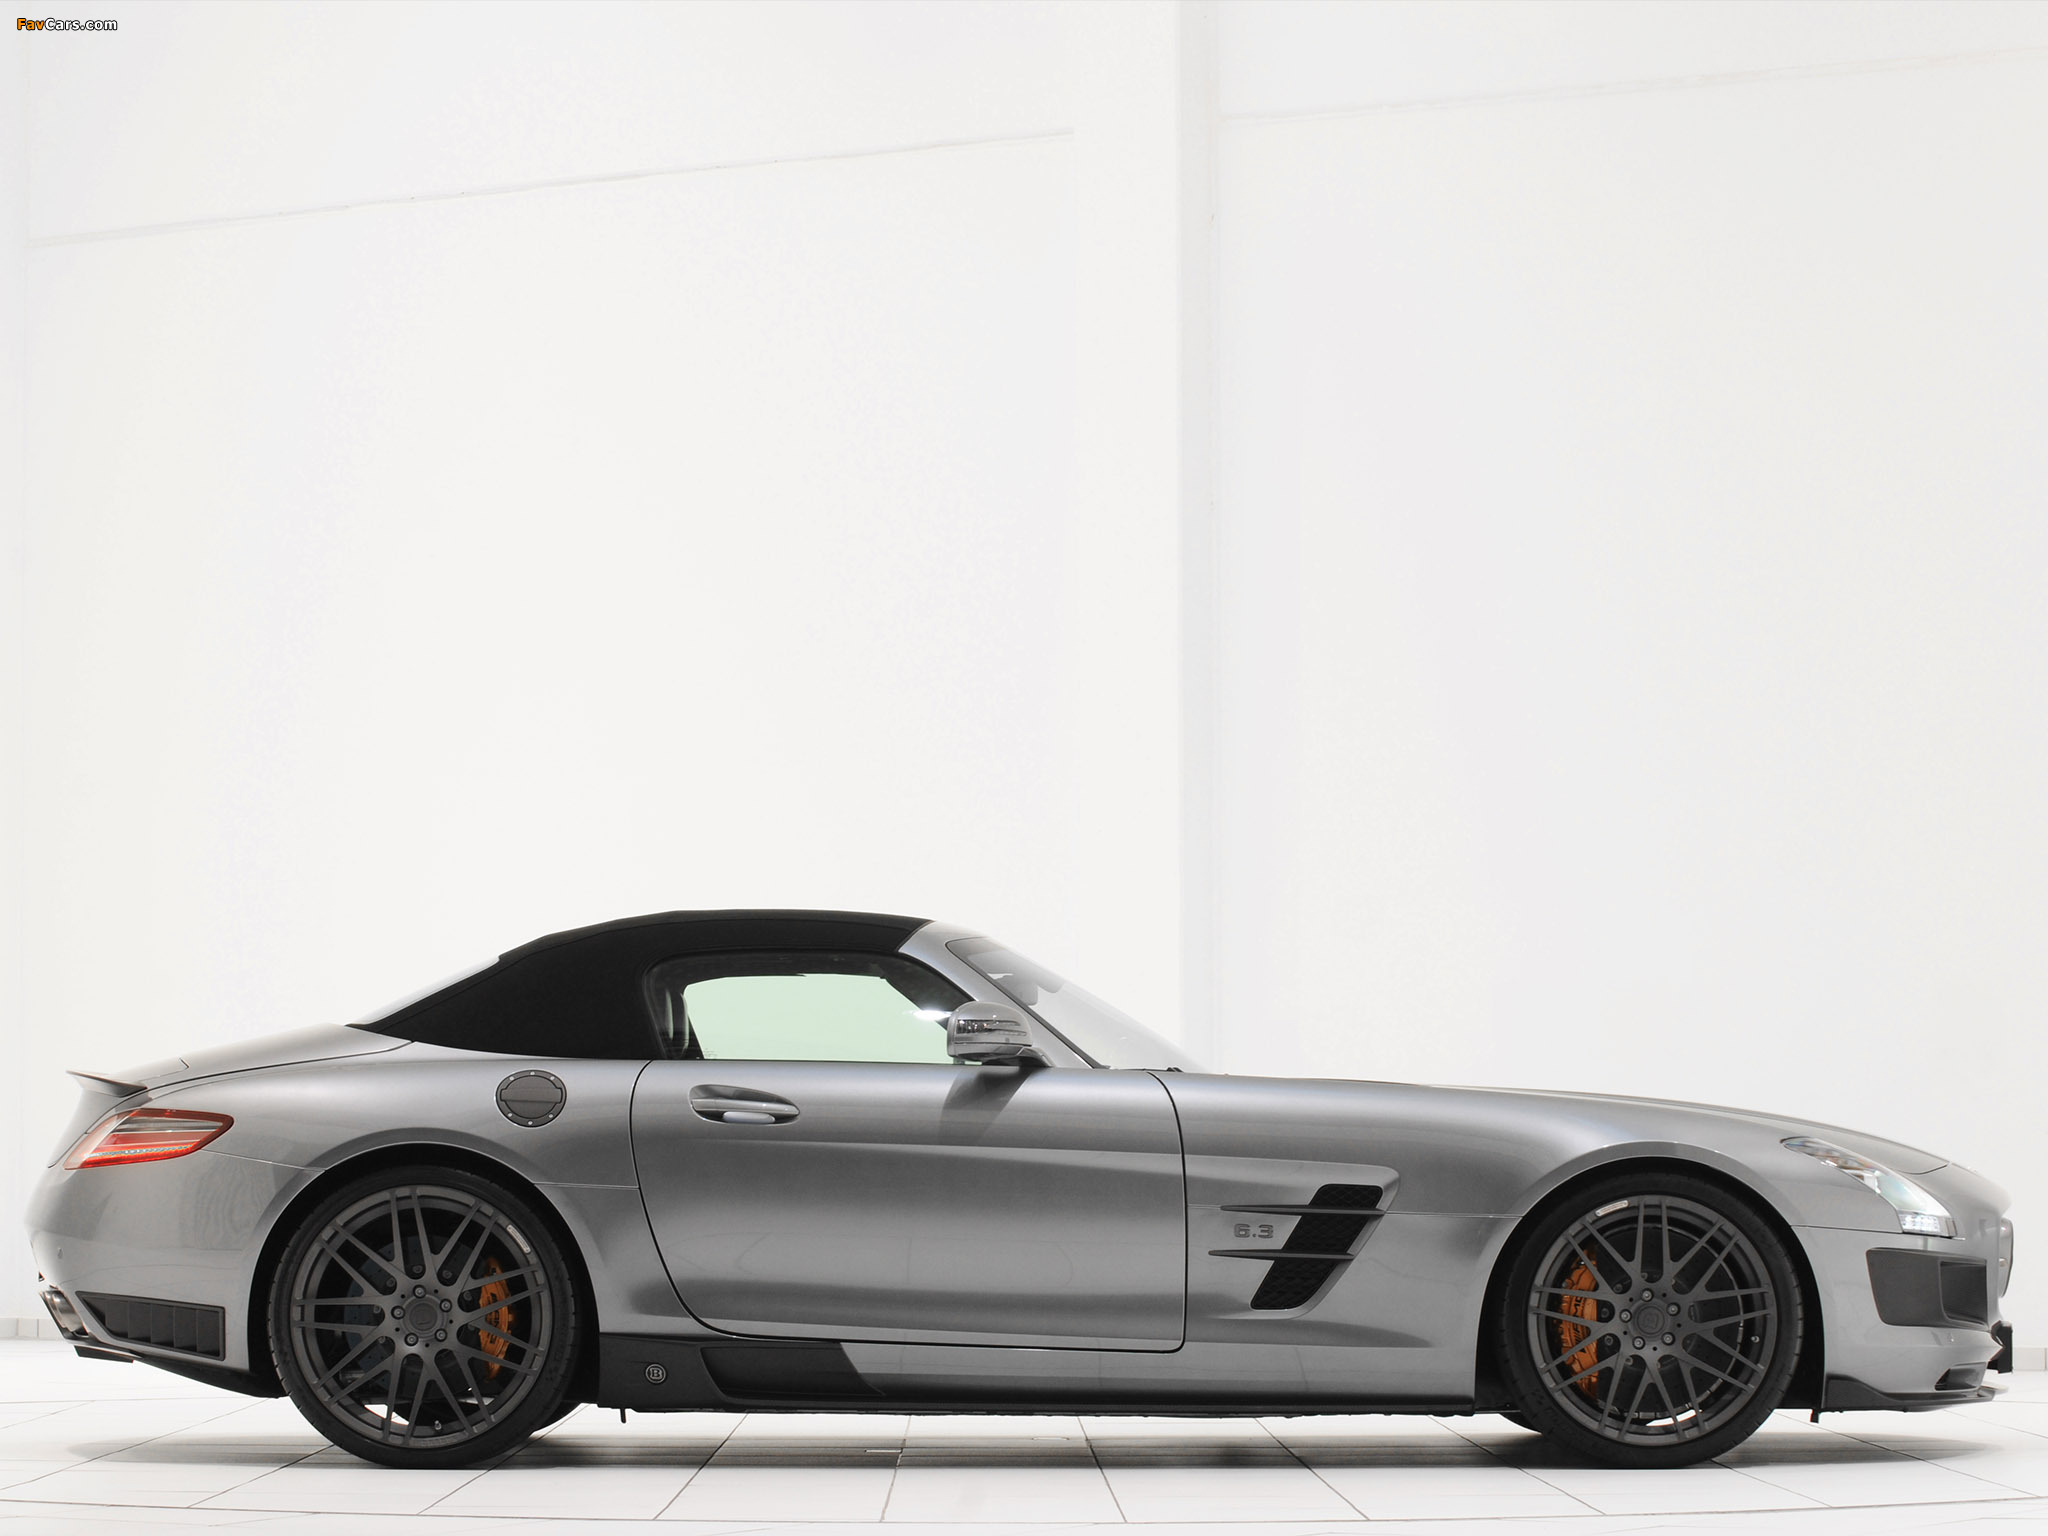 Brabus Mercedes-Benz SLS 63 AMG Roadster (R197) 2011 pictures (2048 x 1536)